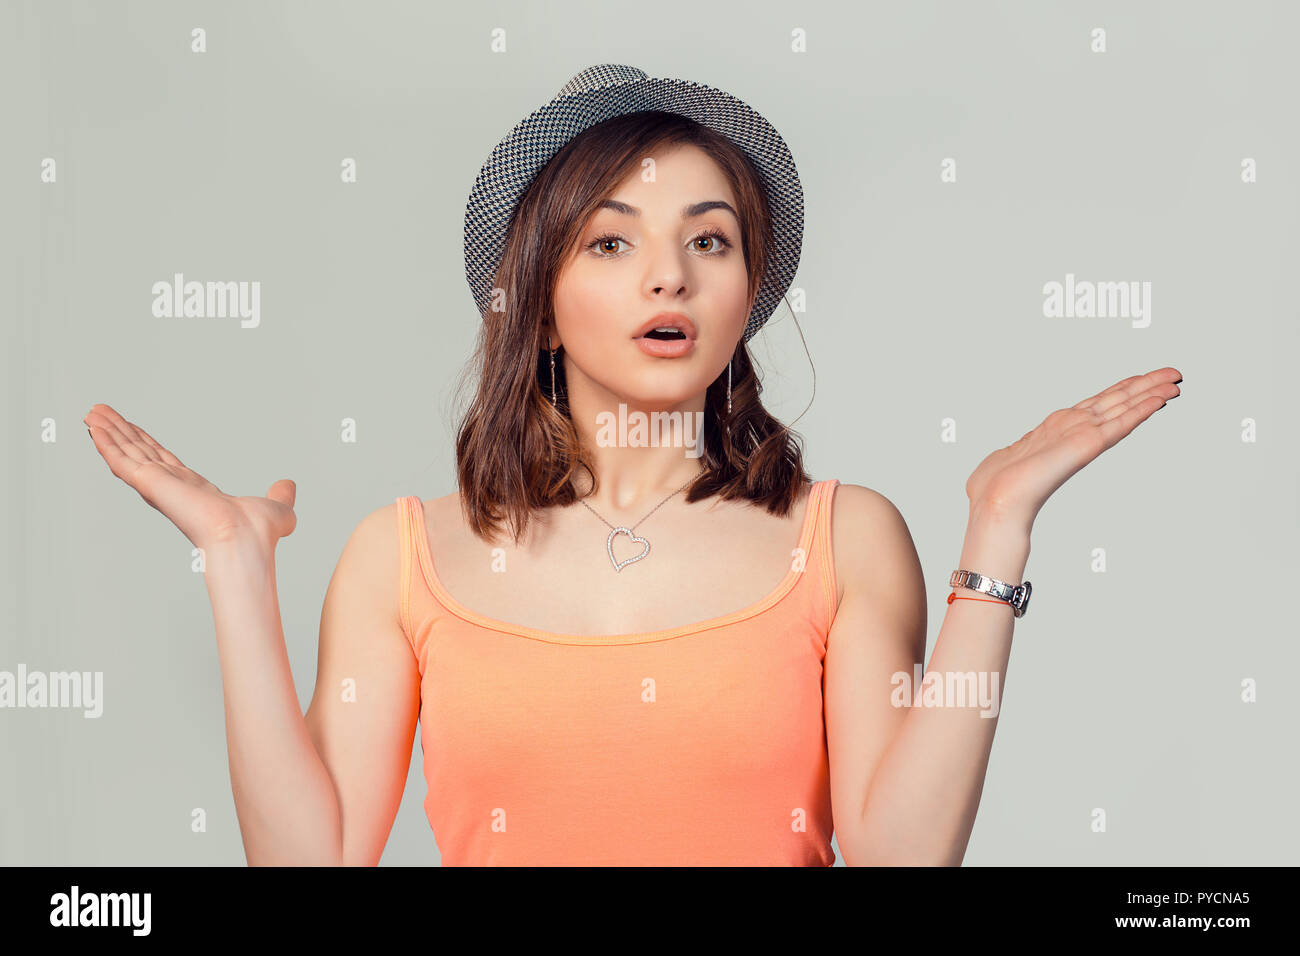 Portrait dumb looking woman arms out shrugs shoulders I don't know isolated on loght gray wall background. Negative human emotion, facial expression b Stock Photo